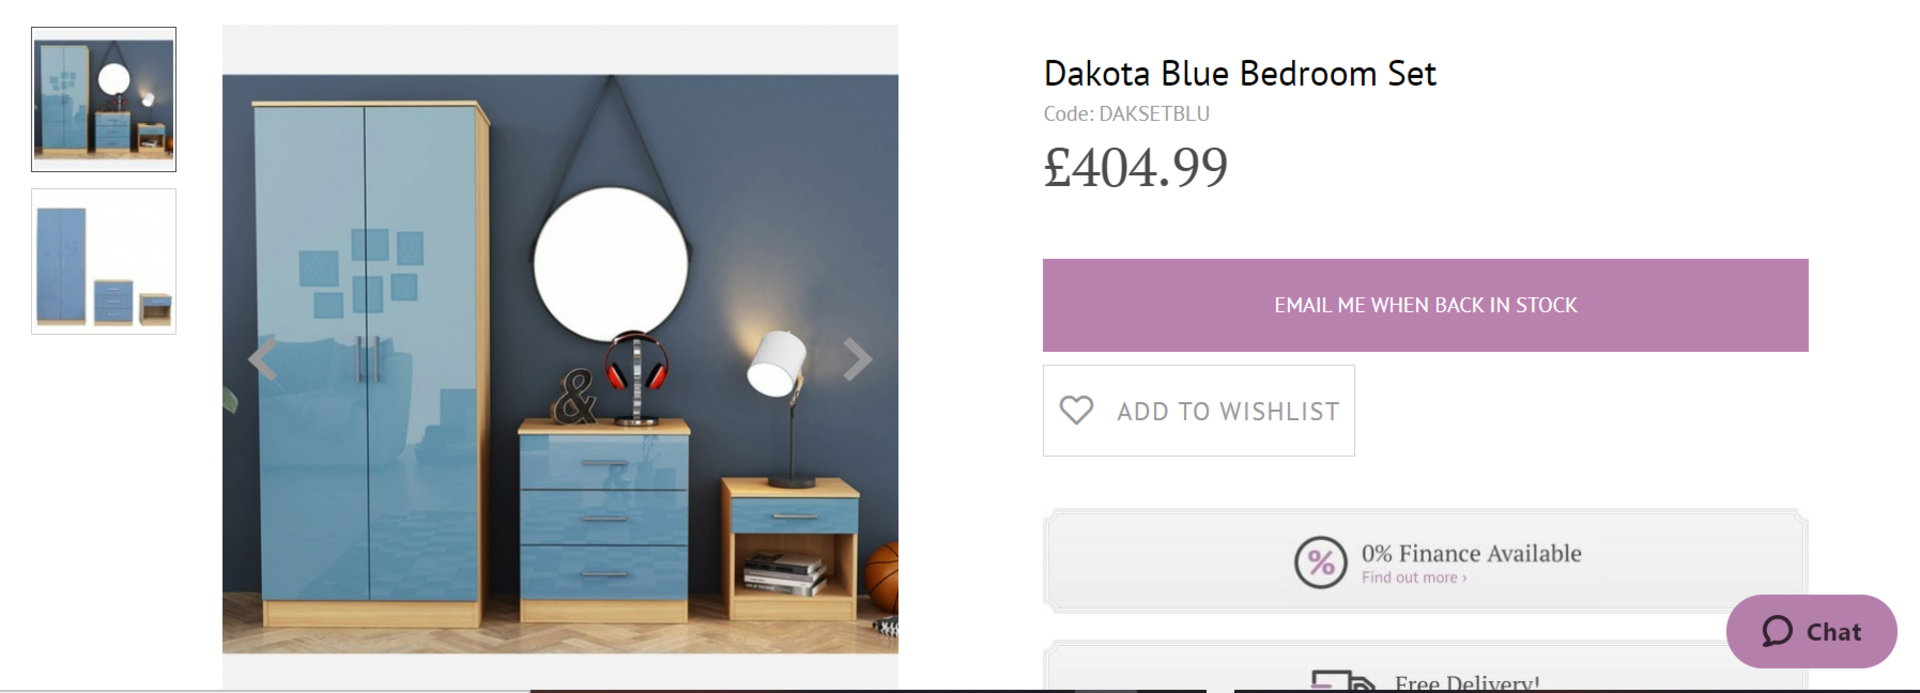 3 X NEW BOXED 3 Piece Dakota Blue Bedroom Set. RRP £404.99 EACH. Made From MDF High Class - Image 2 of 2